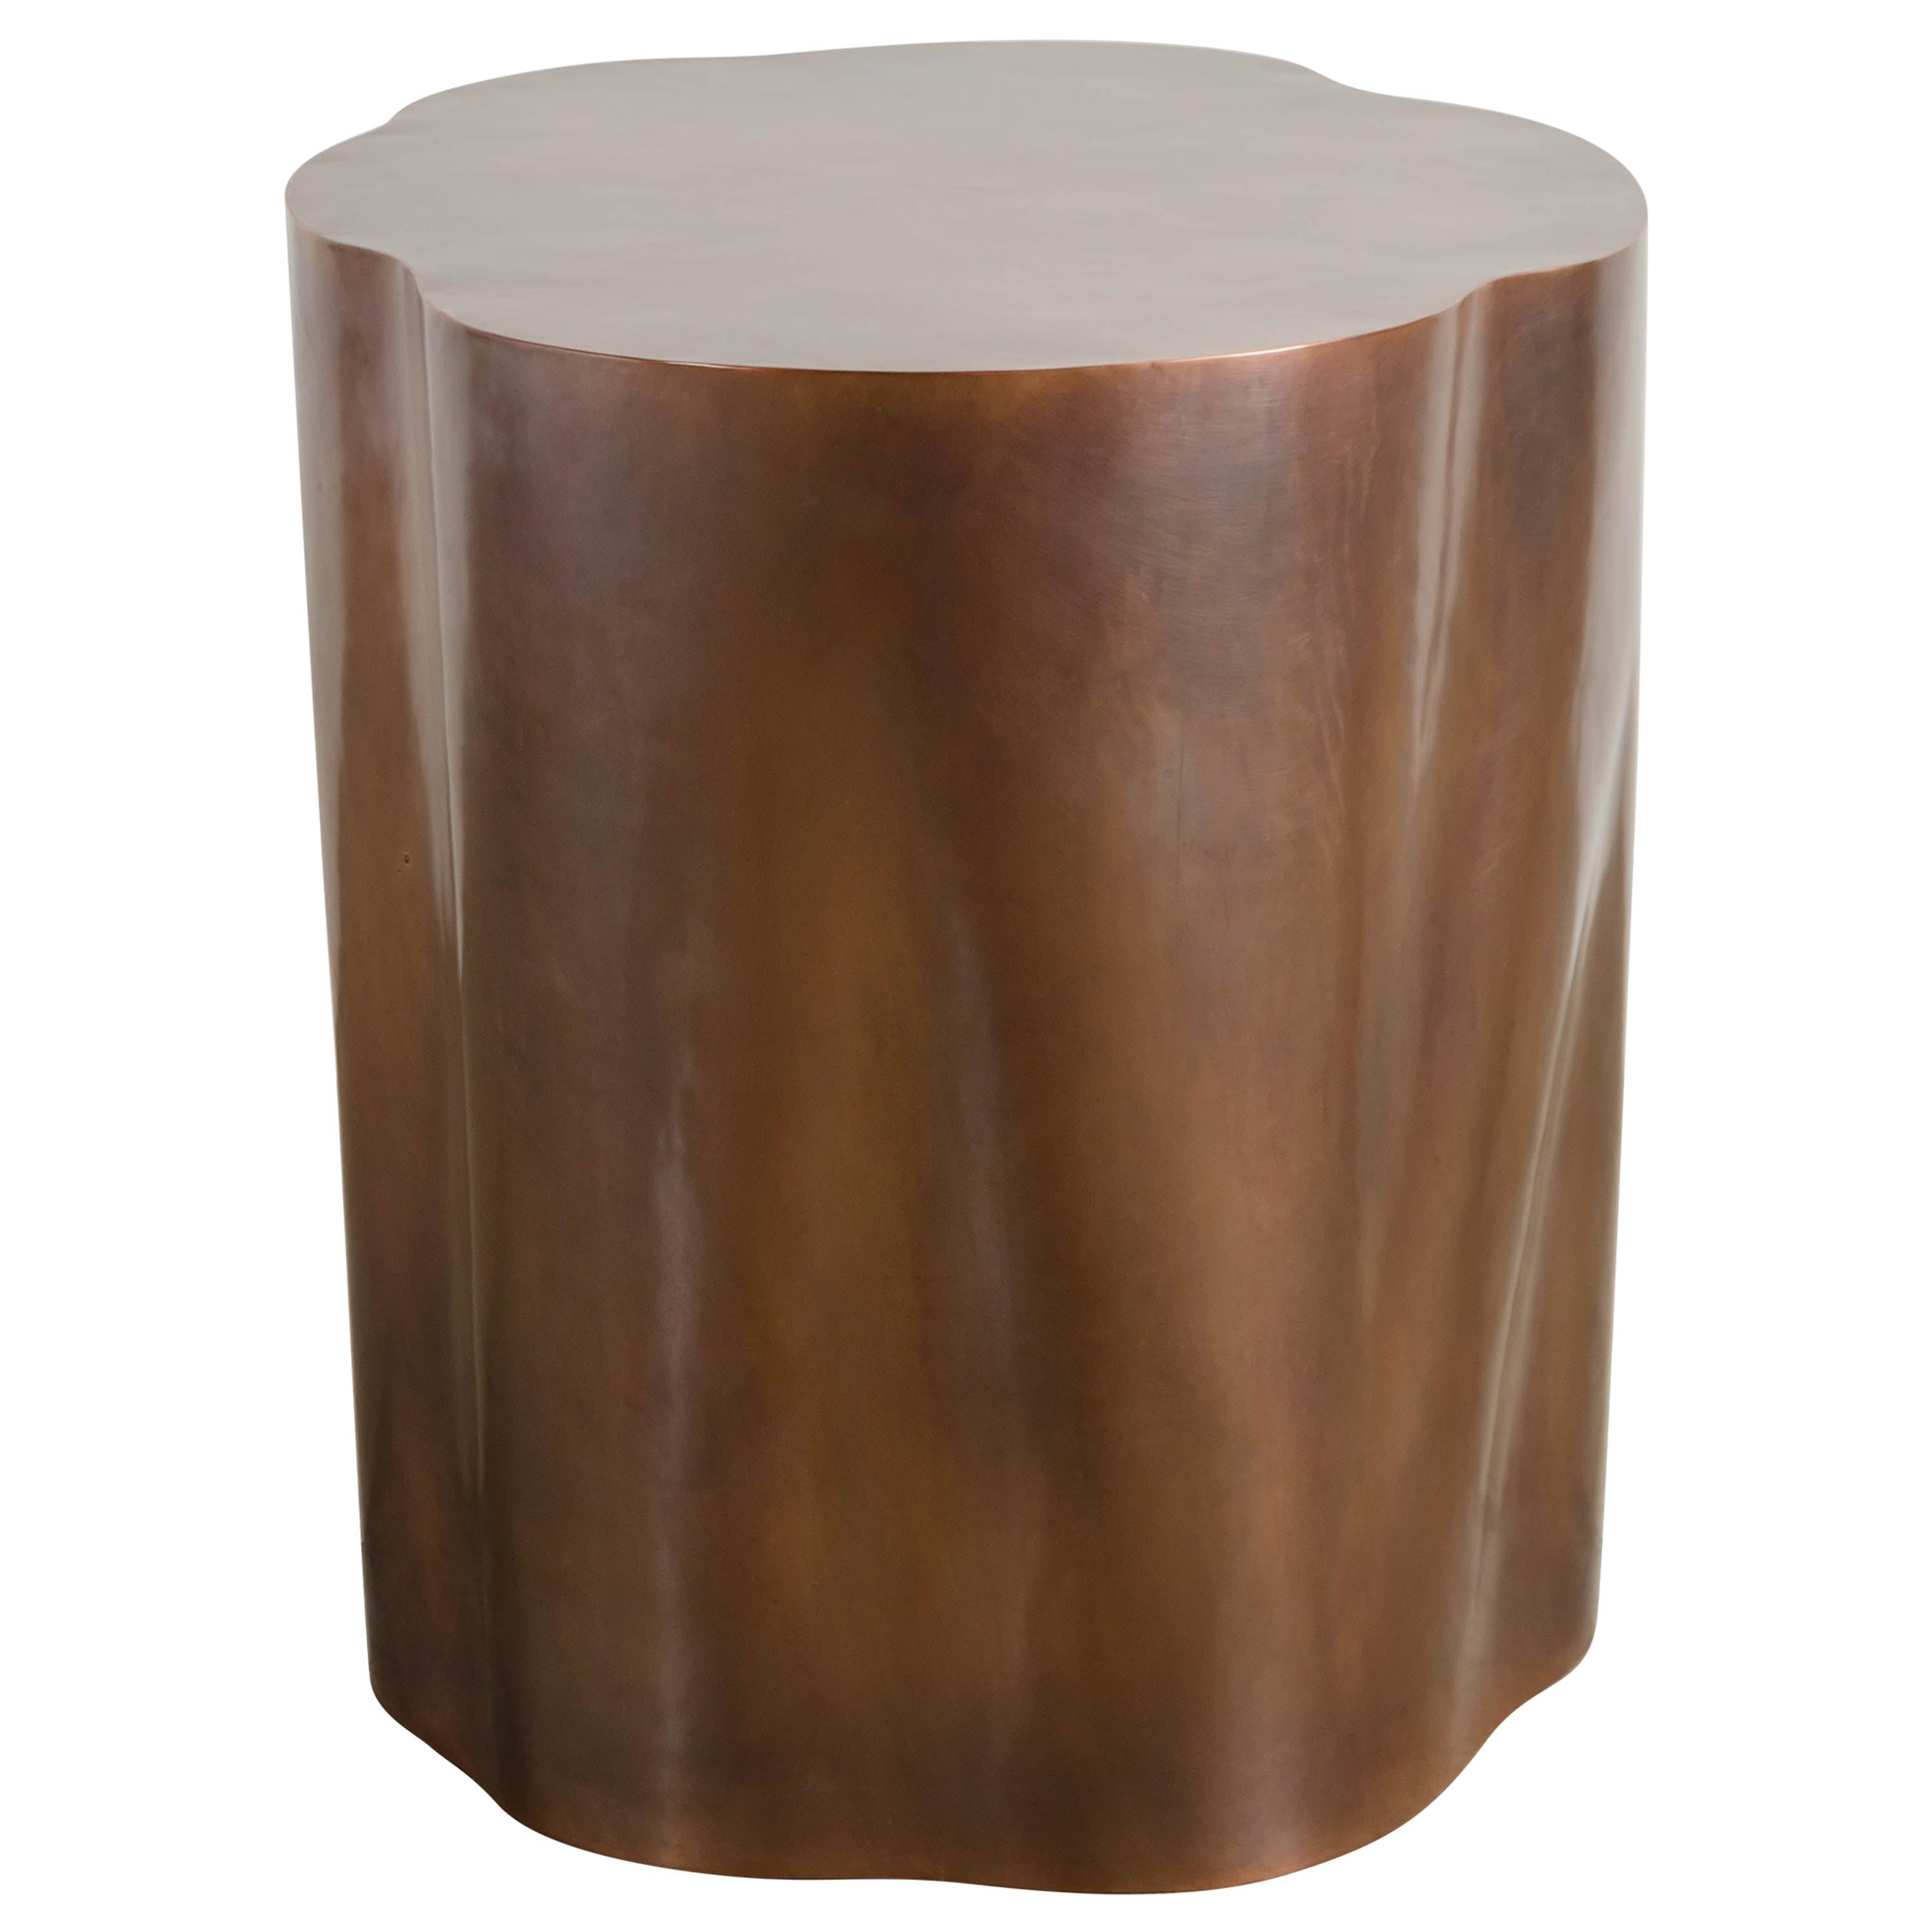 Root Shape Side Table in Copper by Robert Kuo, Limited Edition